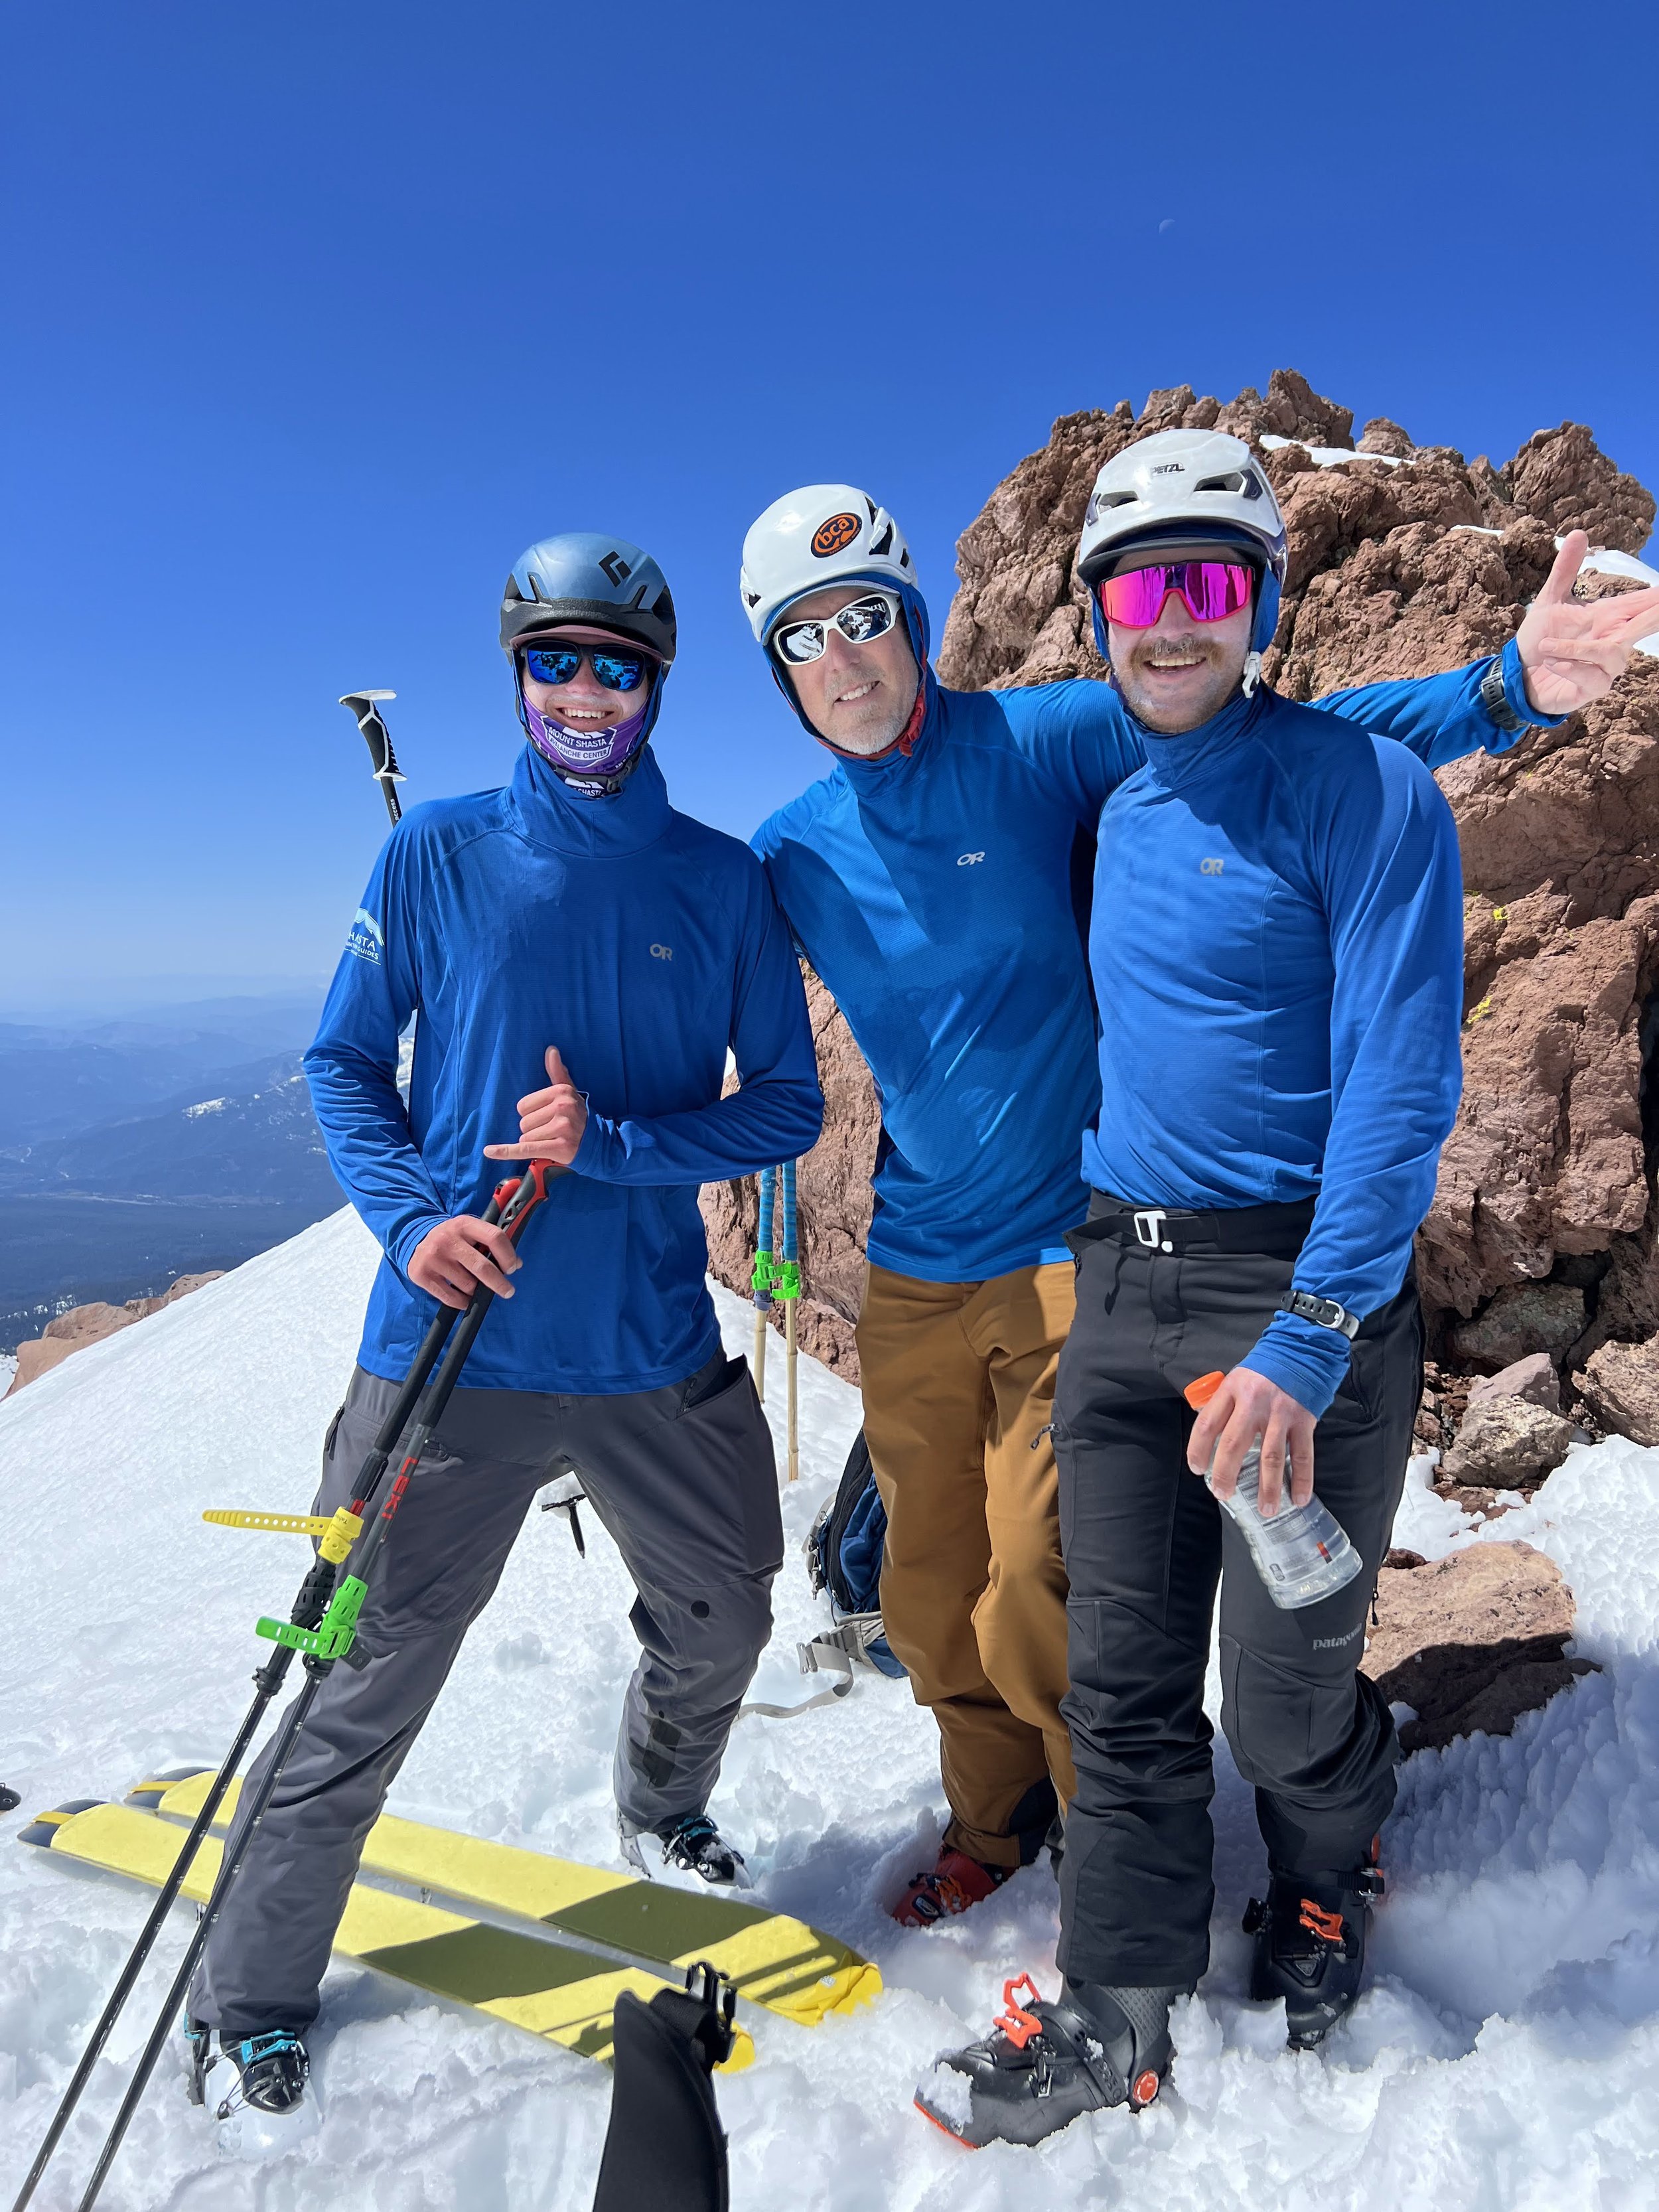 ski mountaineers pose at the summit of mt shasta